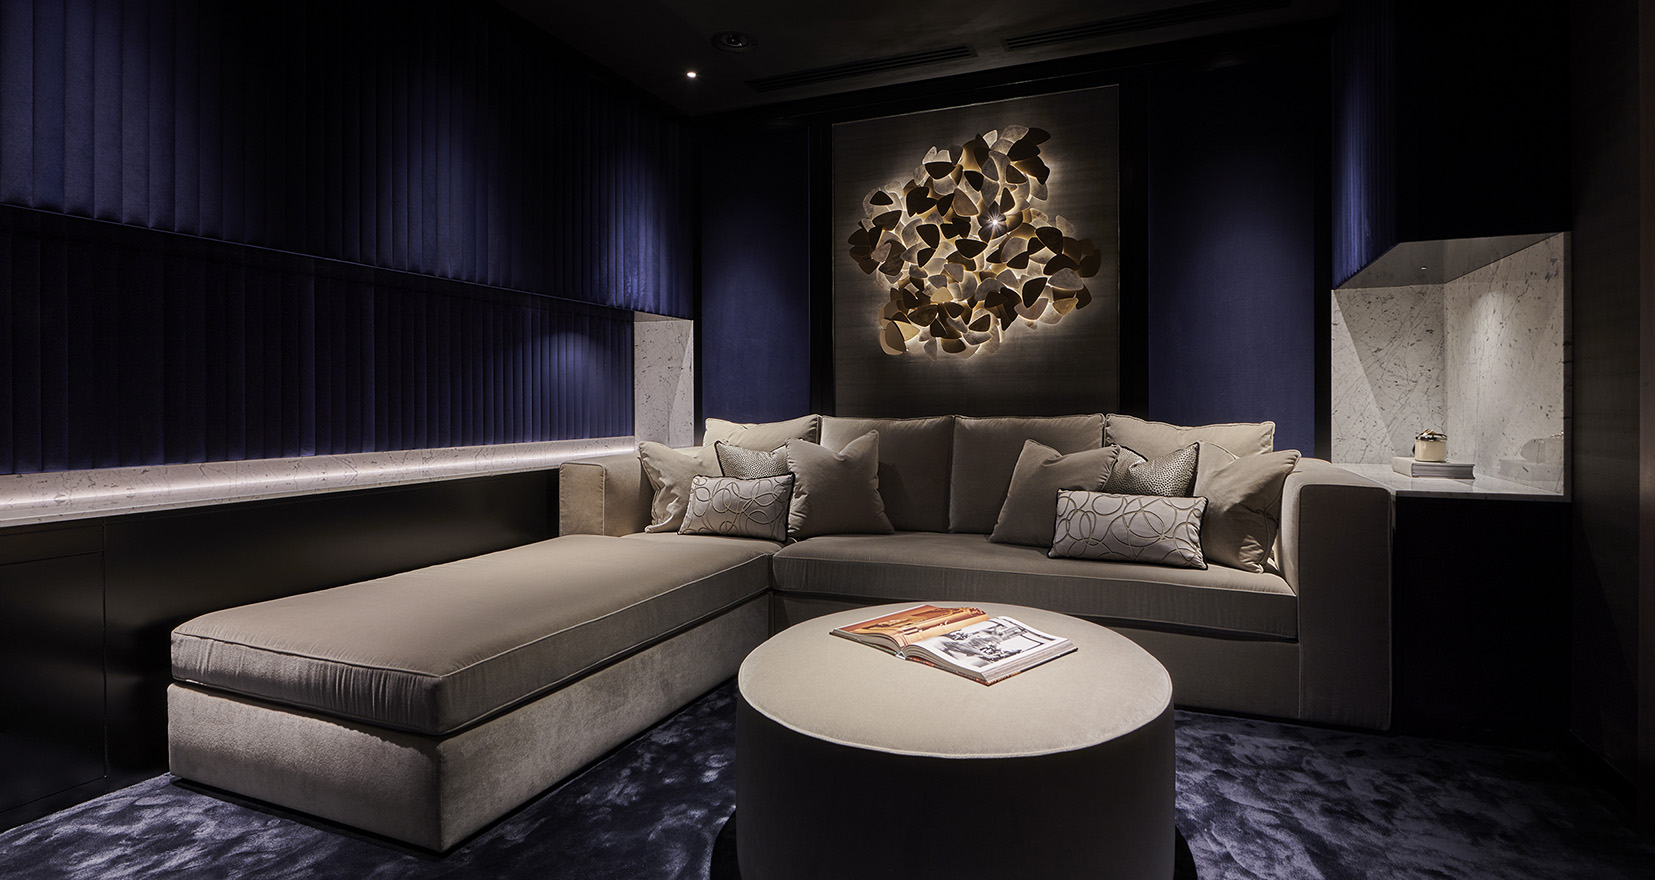 Home Cinema Lighting: 4 Ideas to Improve Your Home Theatre - Marcled Blog